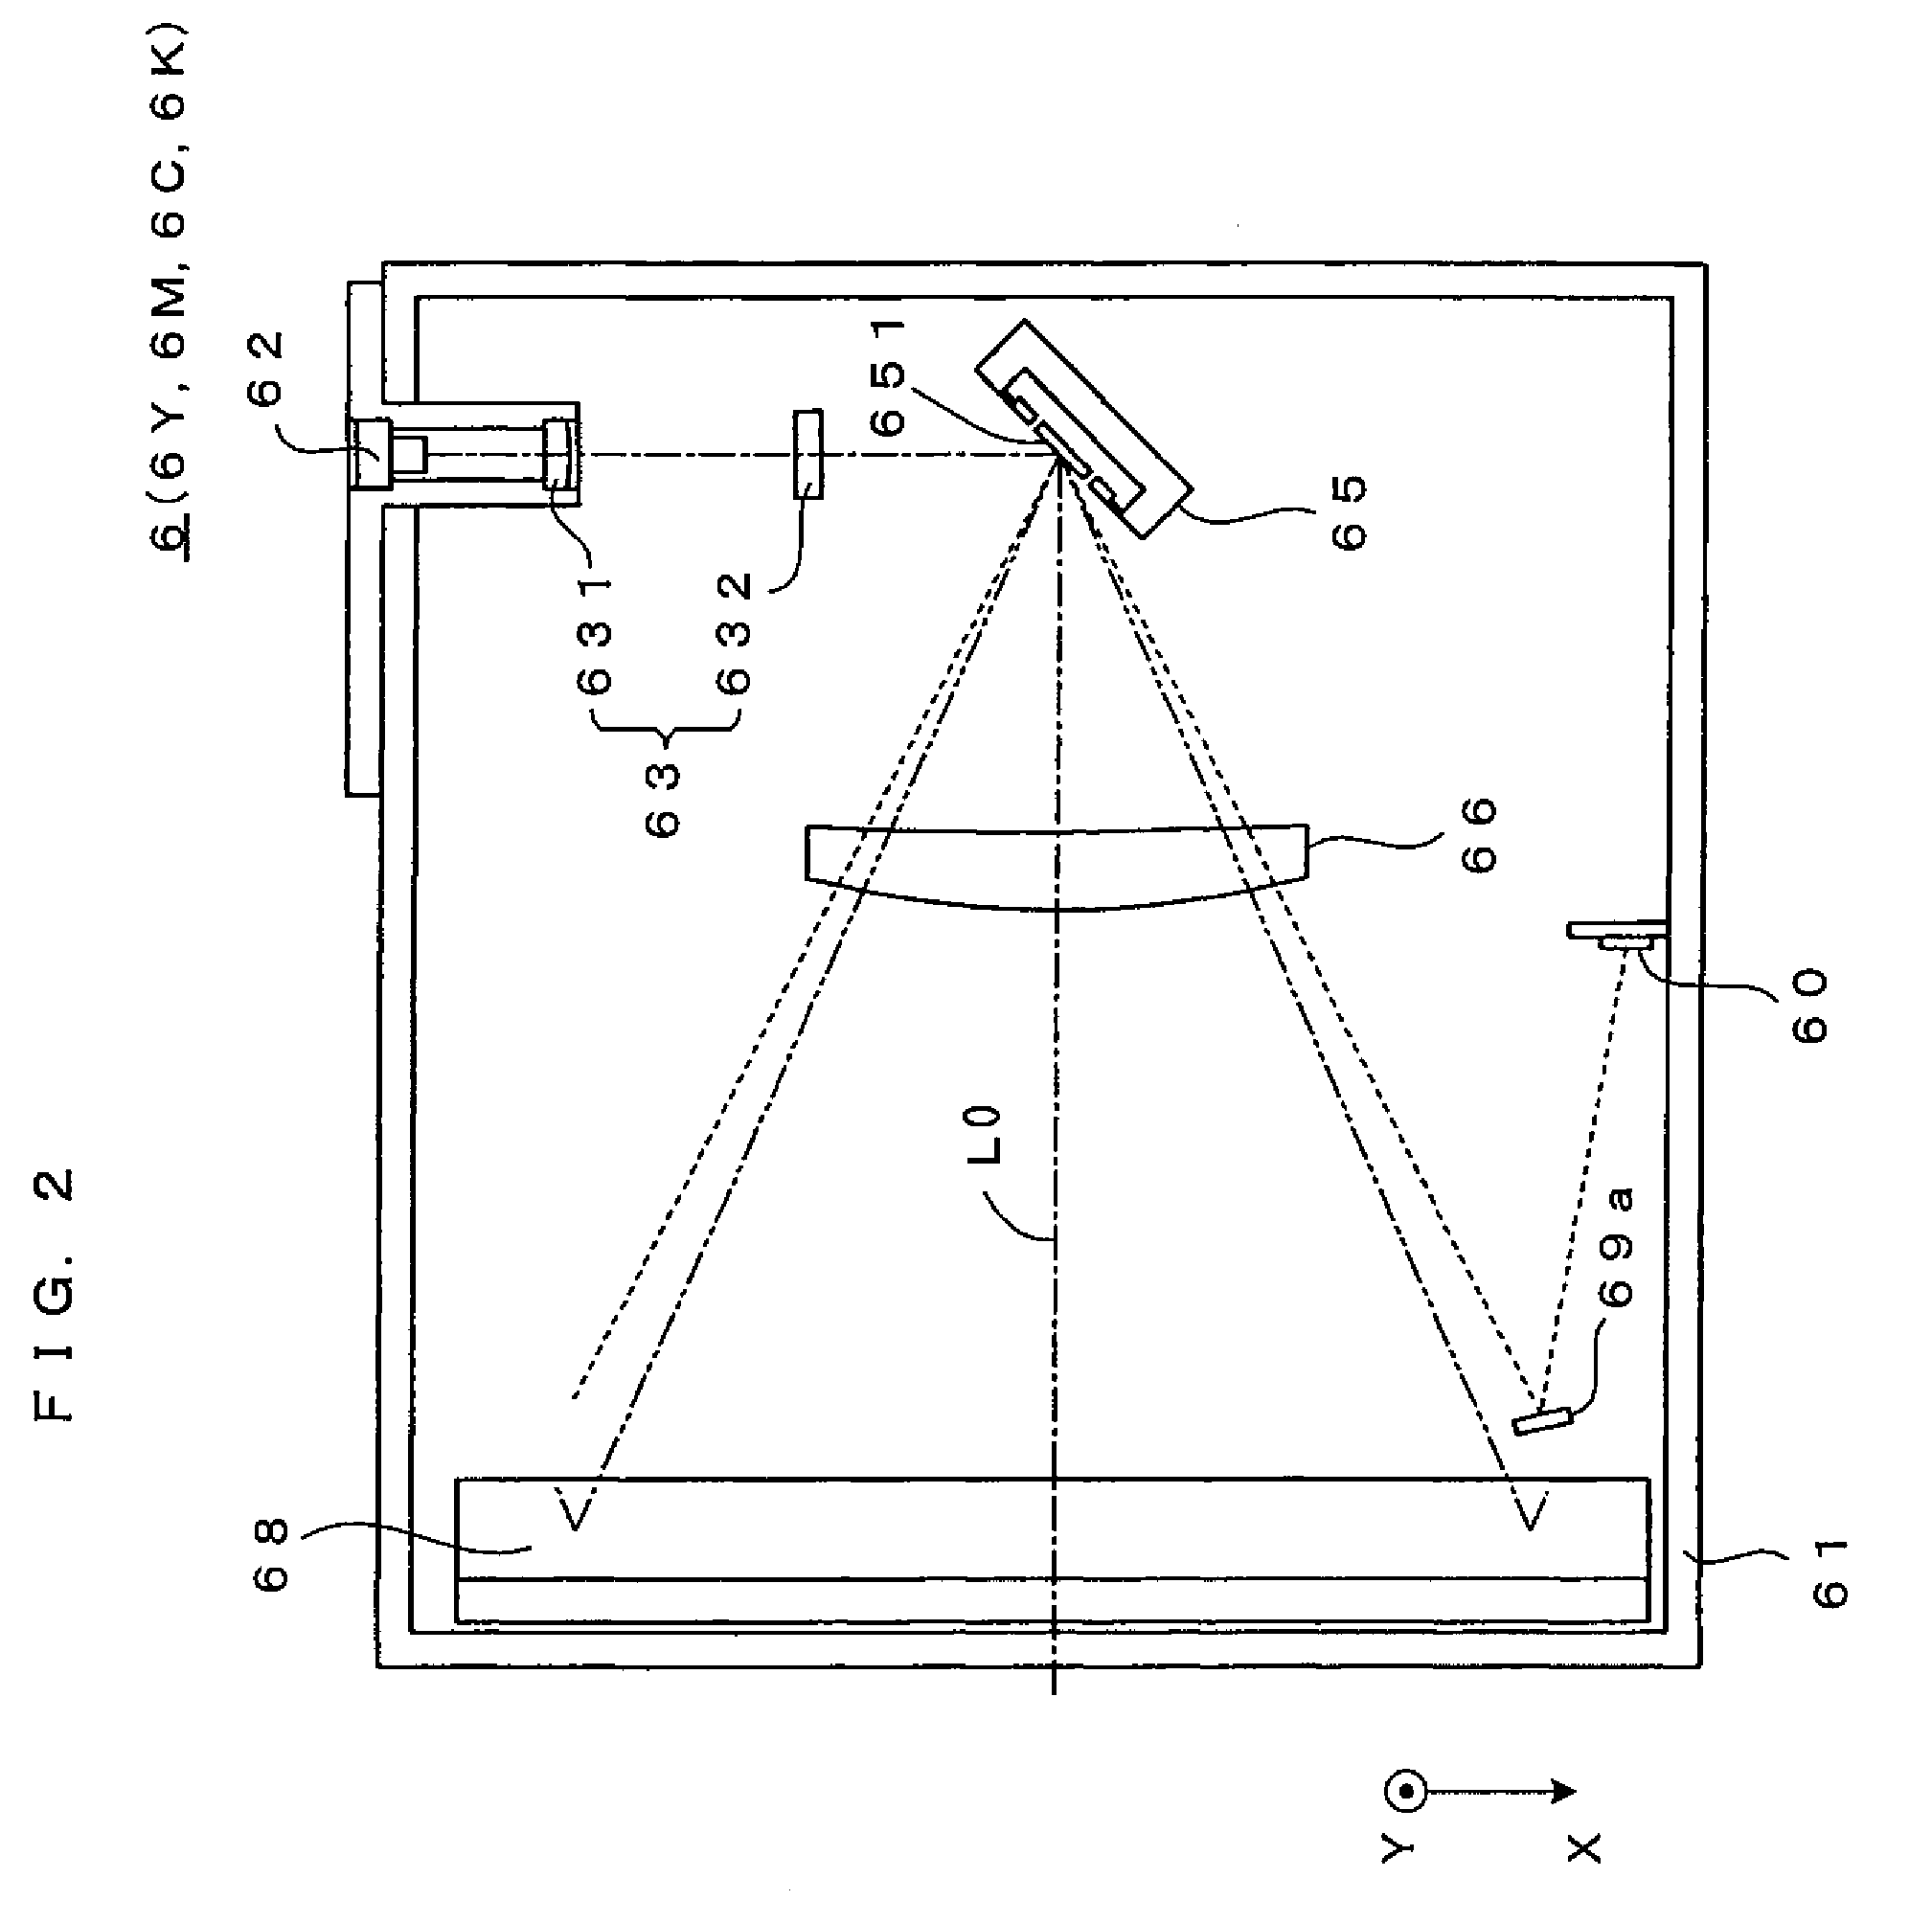 Light scanning apparatus and method to prevent damage to an oscillation mirror in an abnormal control condition via a detection signal outputted to a controller even though the source still emits light